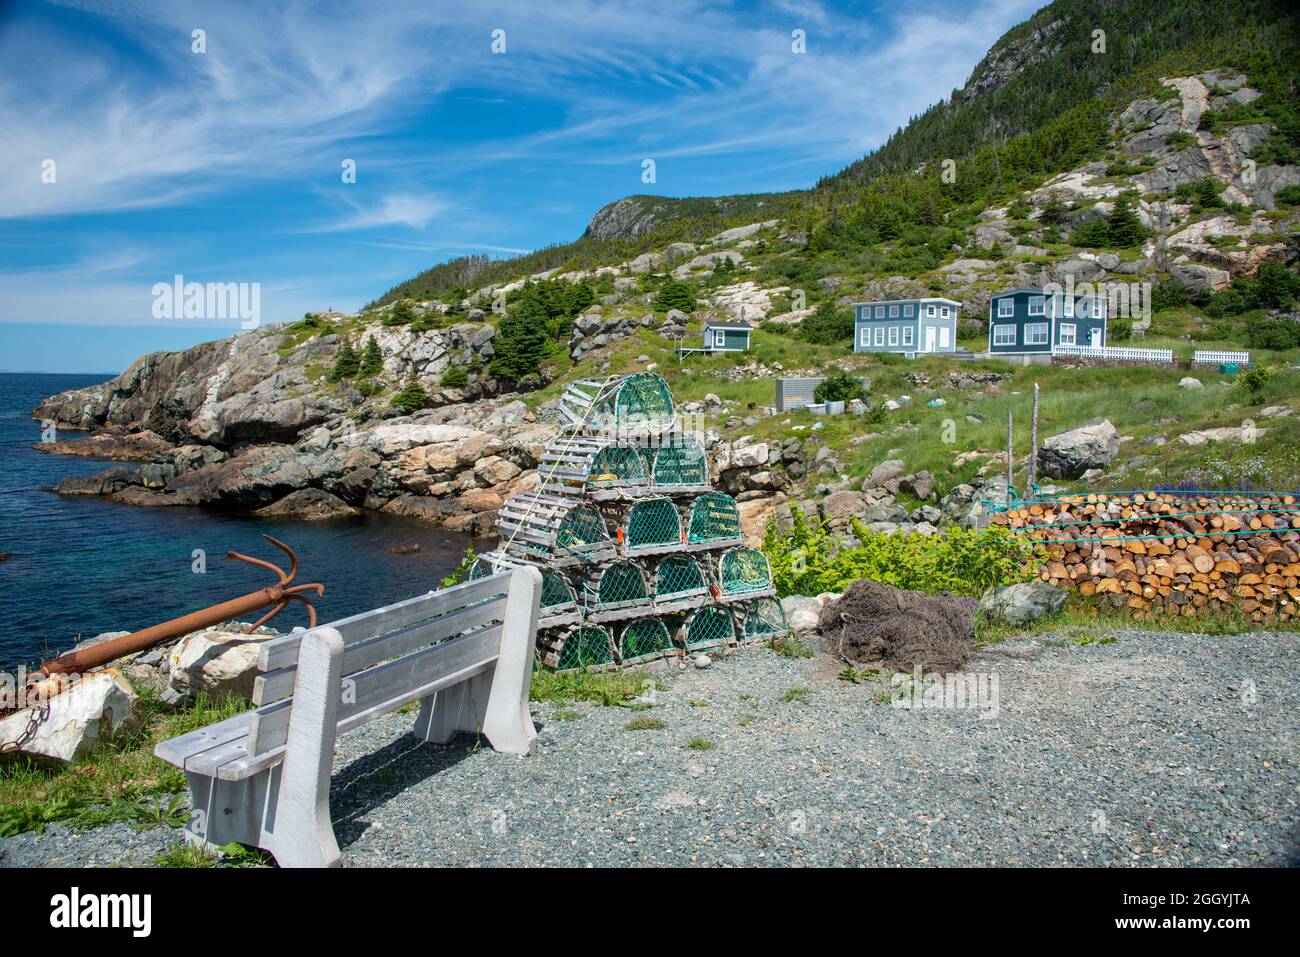 A view of Bauline Harbour, Newfoundland, a small fishing village with a sheltered harbour surrounded by small fishing boats. Stock Photo